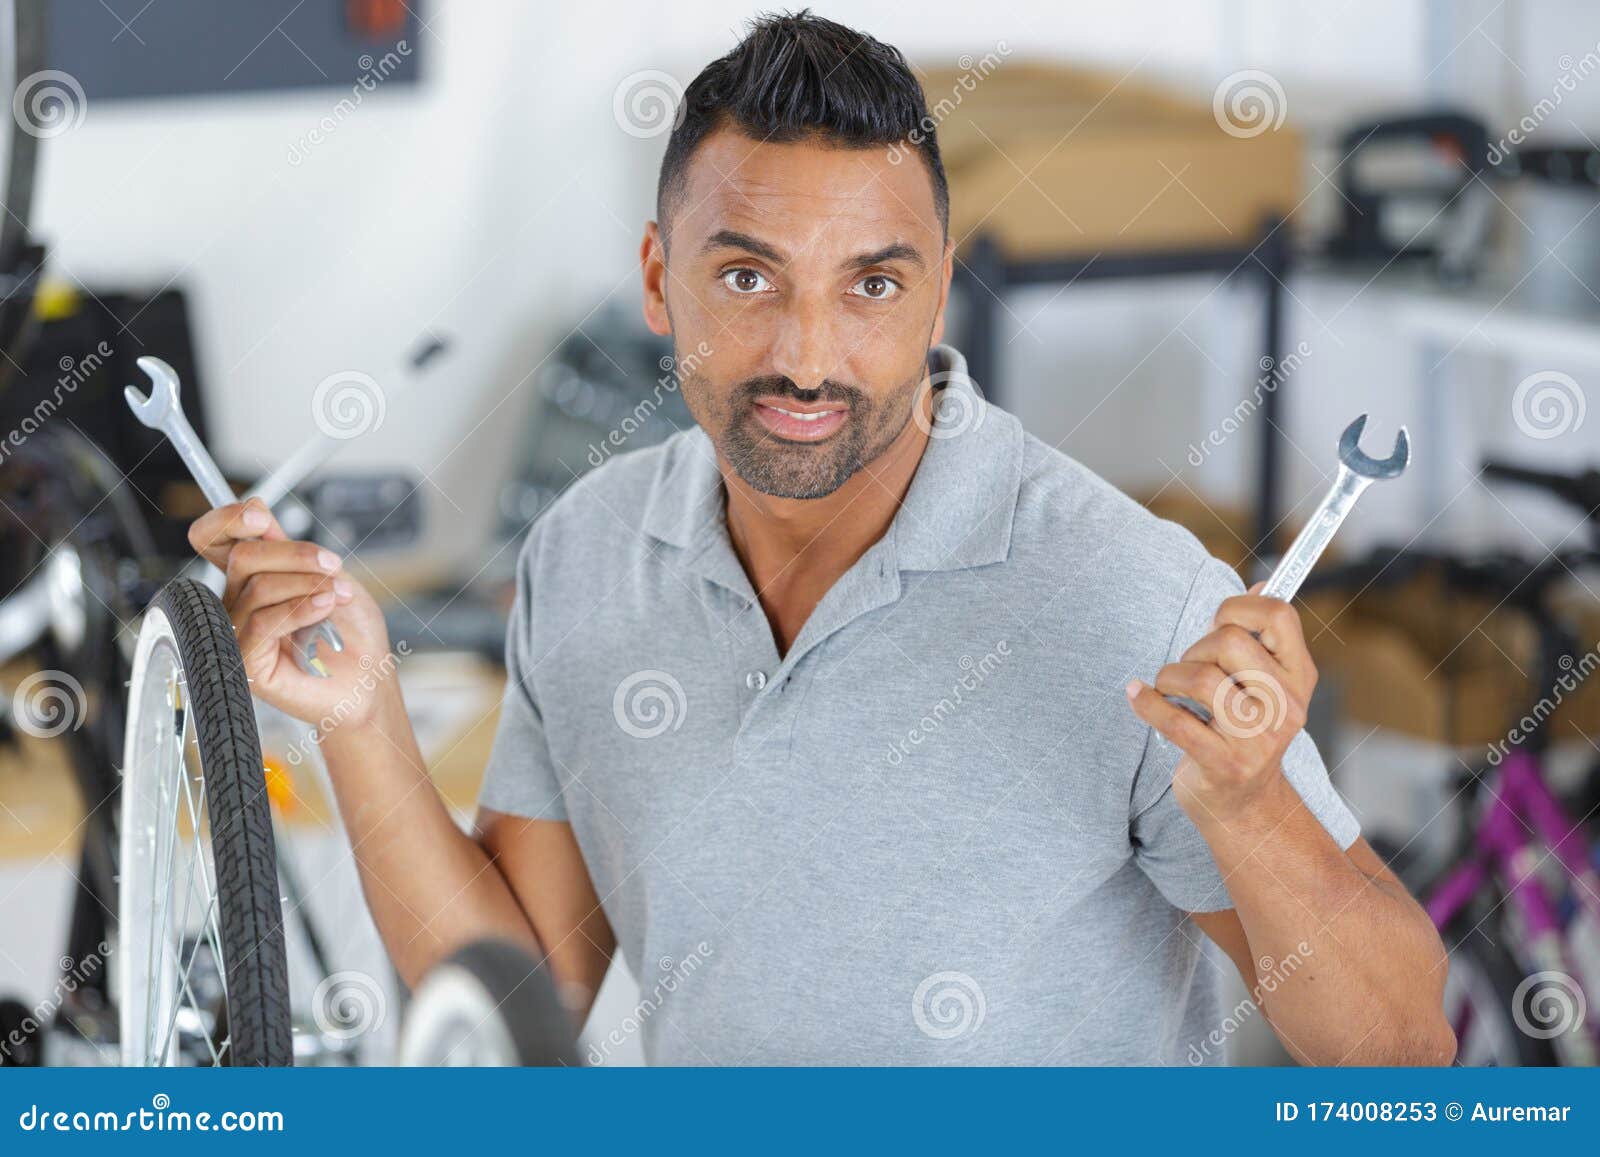 Mechanic Confused About Tools Stock Image Image Of Garage Mechanic